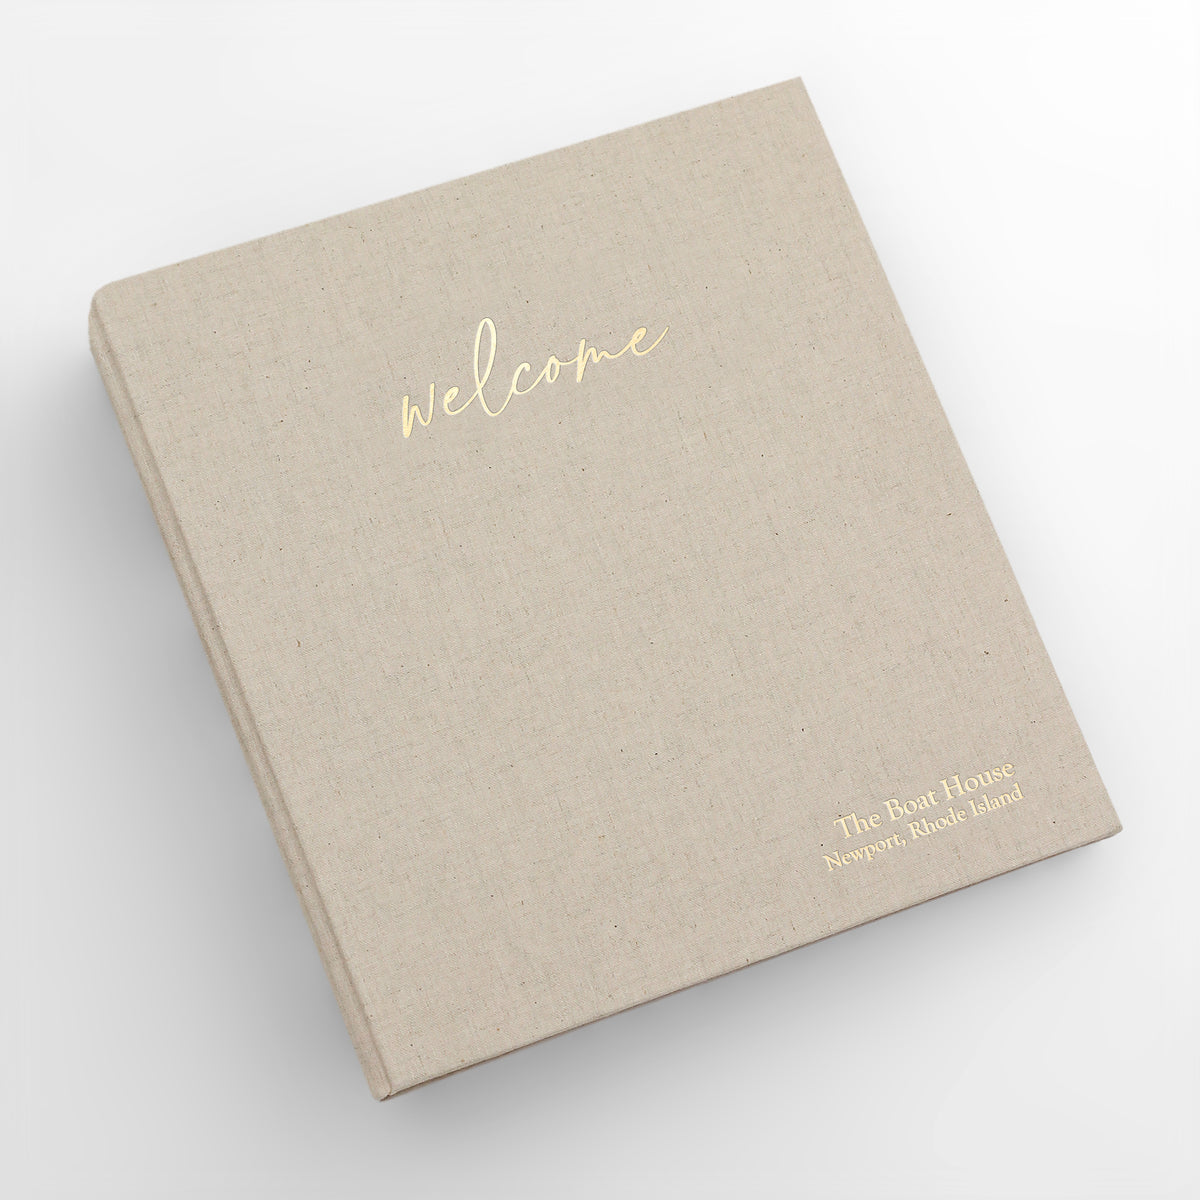 Welcome Binder with Natural Linen Cover | Home | Air BNB